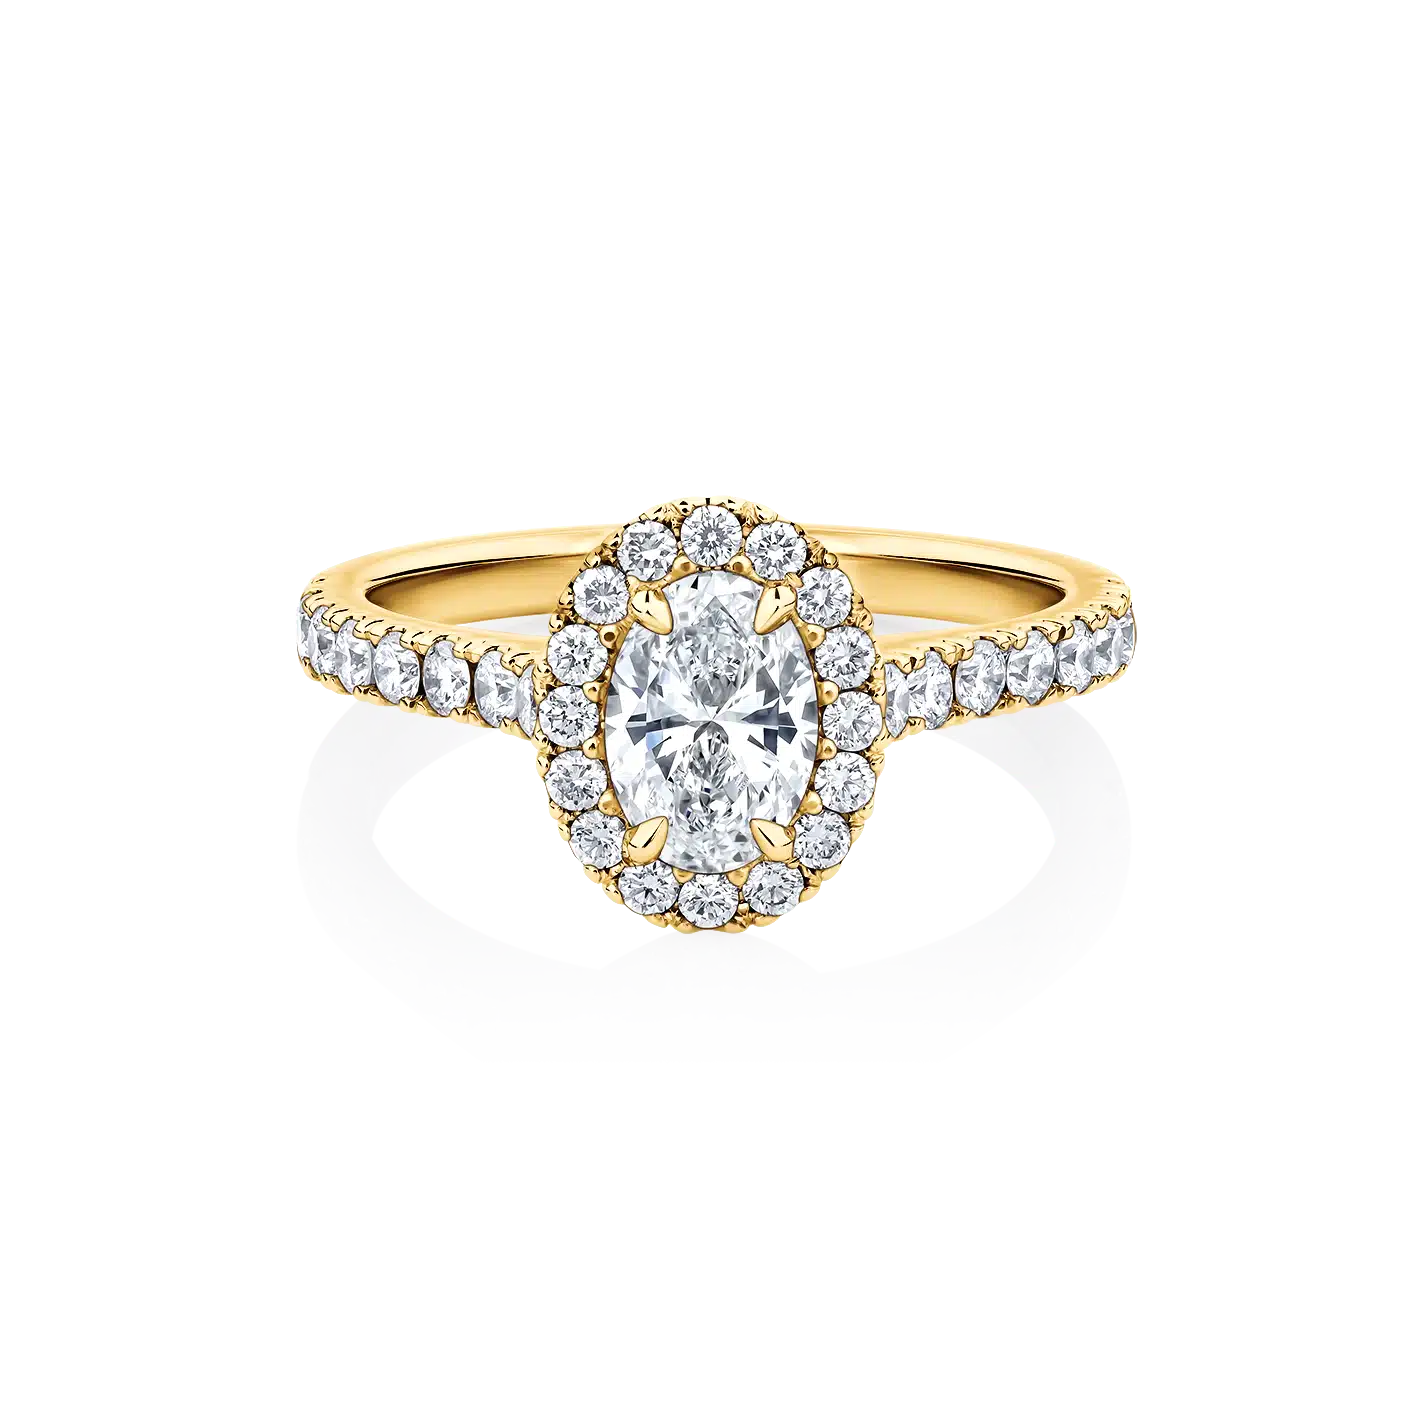 Wattle two tone engagement ring